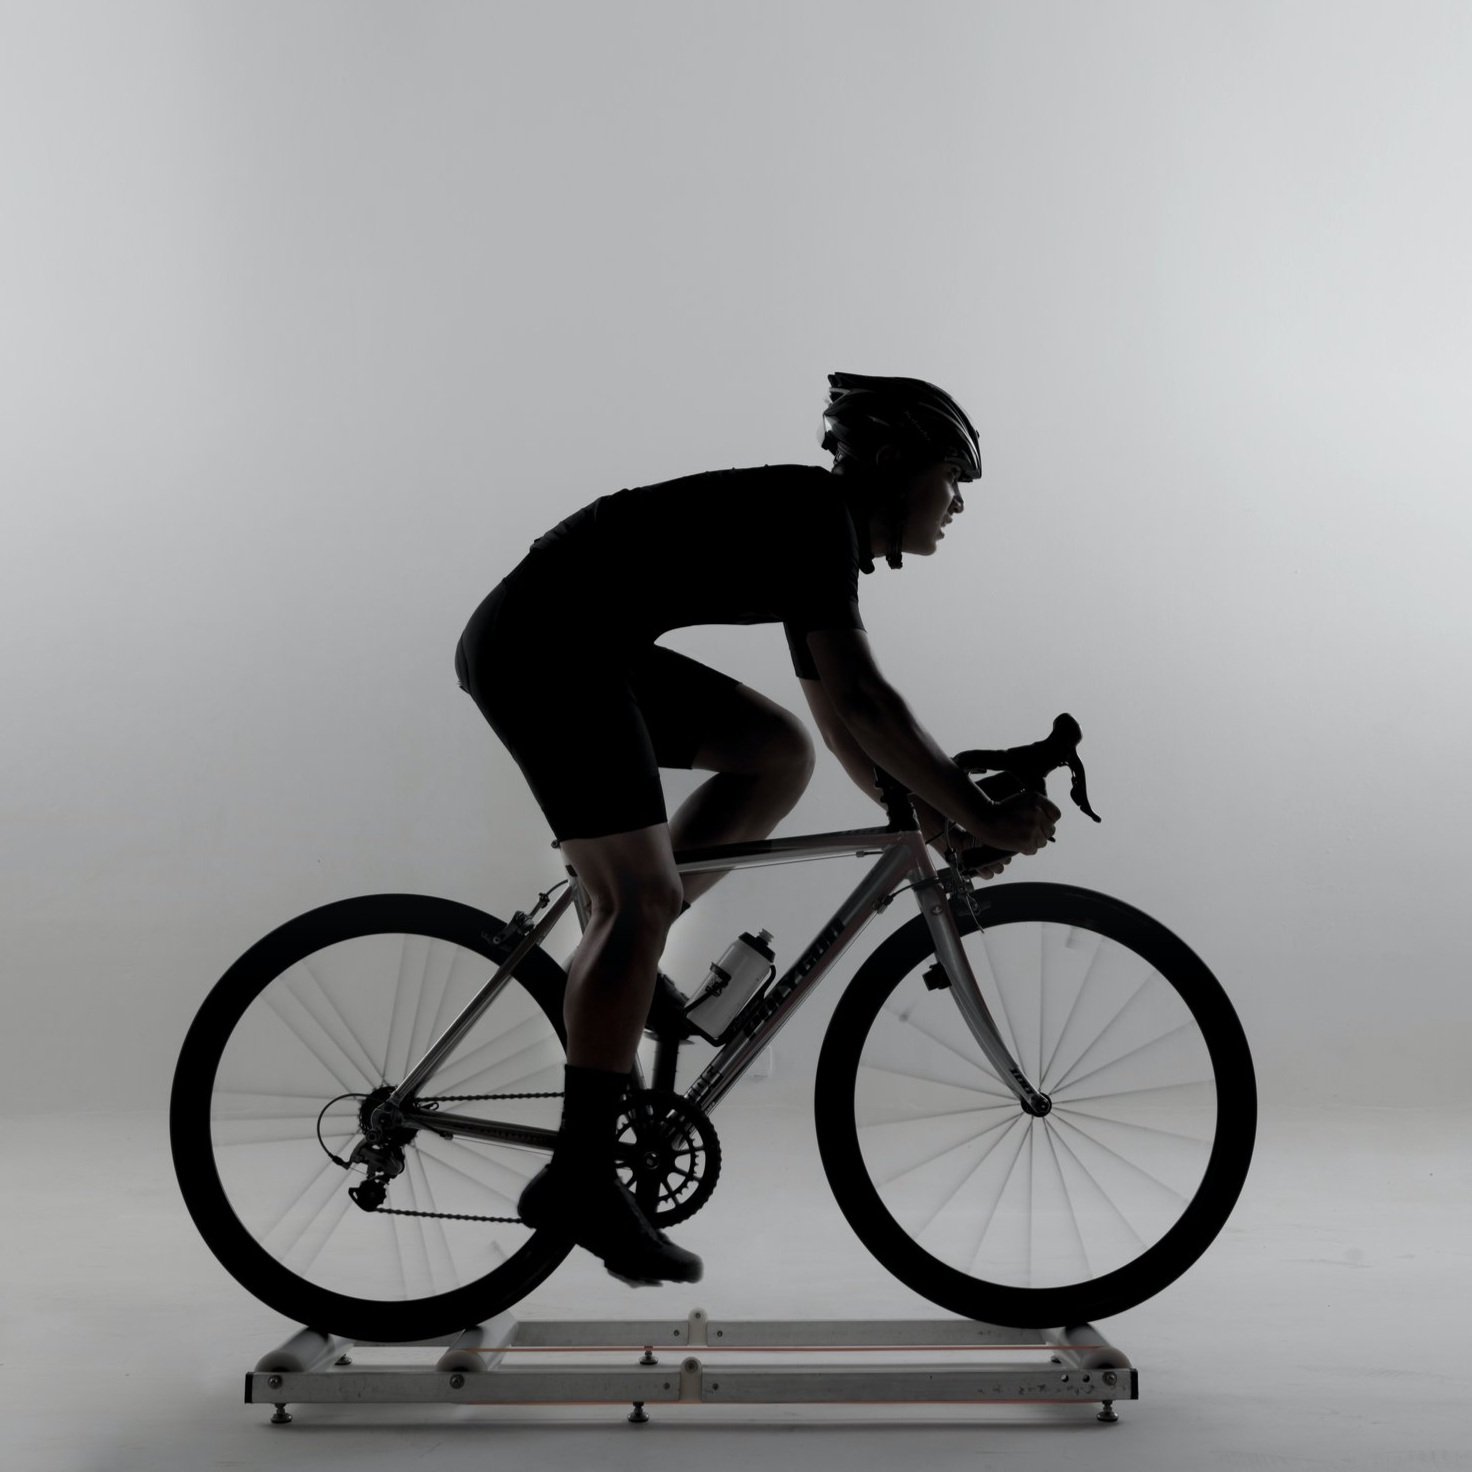 A black and white image of someone riding a bicycle indoors